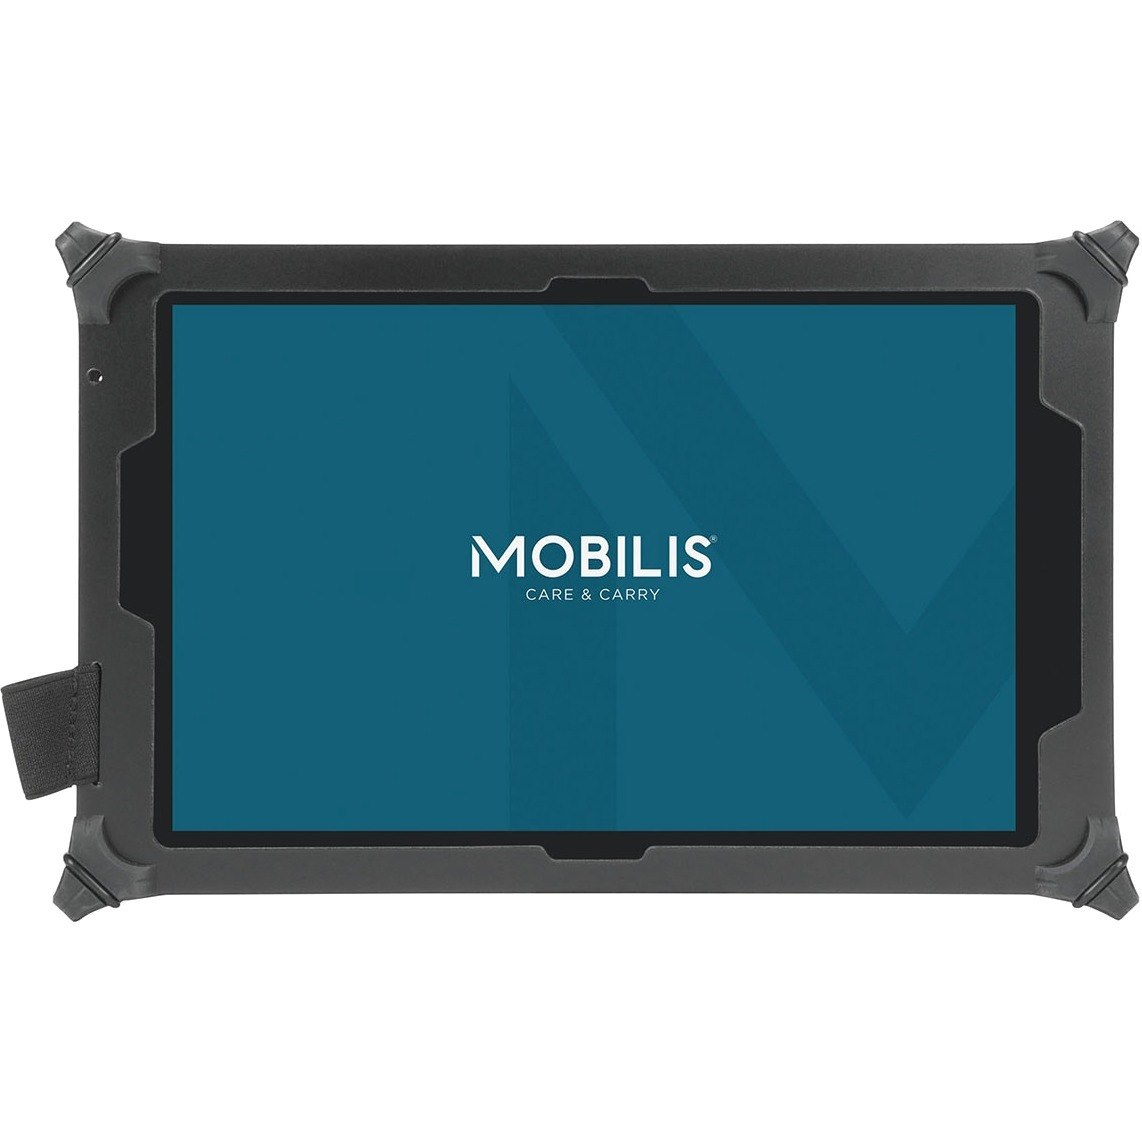 MOBILIS Resist Pack Carrying Case for 20.3 cm (8") Samsung Galaxy Tab A Tablet - Black